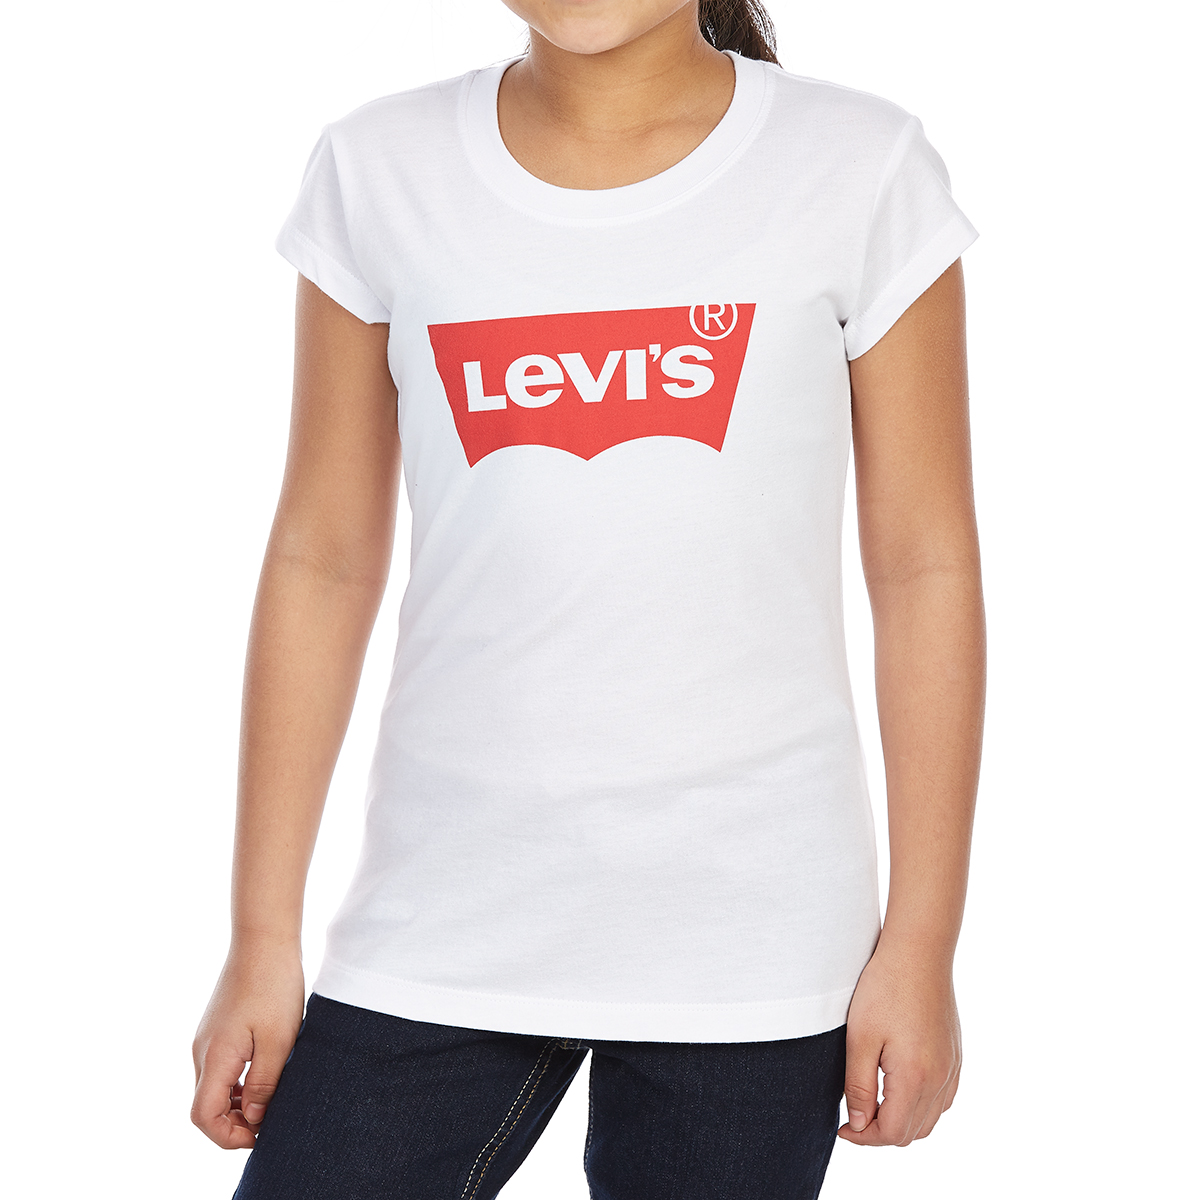 Levi's Toddler Girls' Batwing Short-Sleeve Tee - Red, 3T